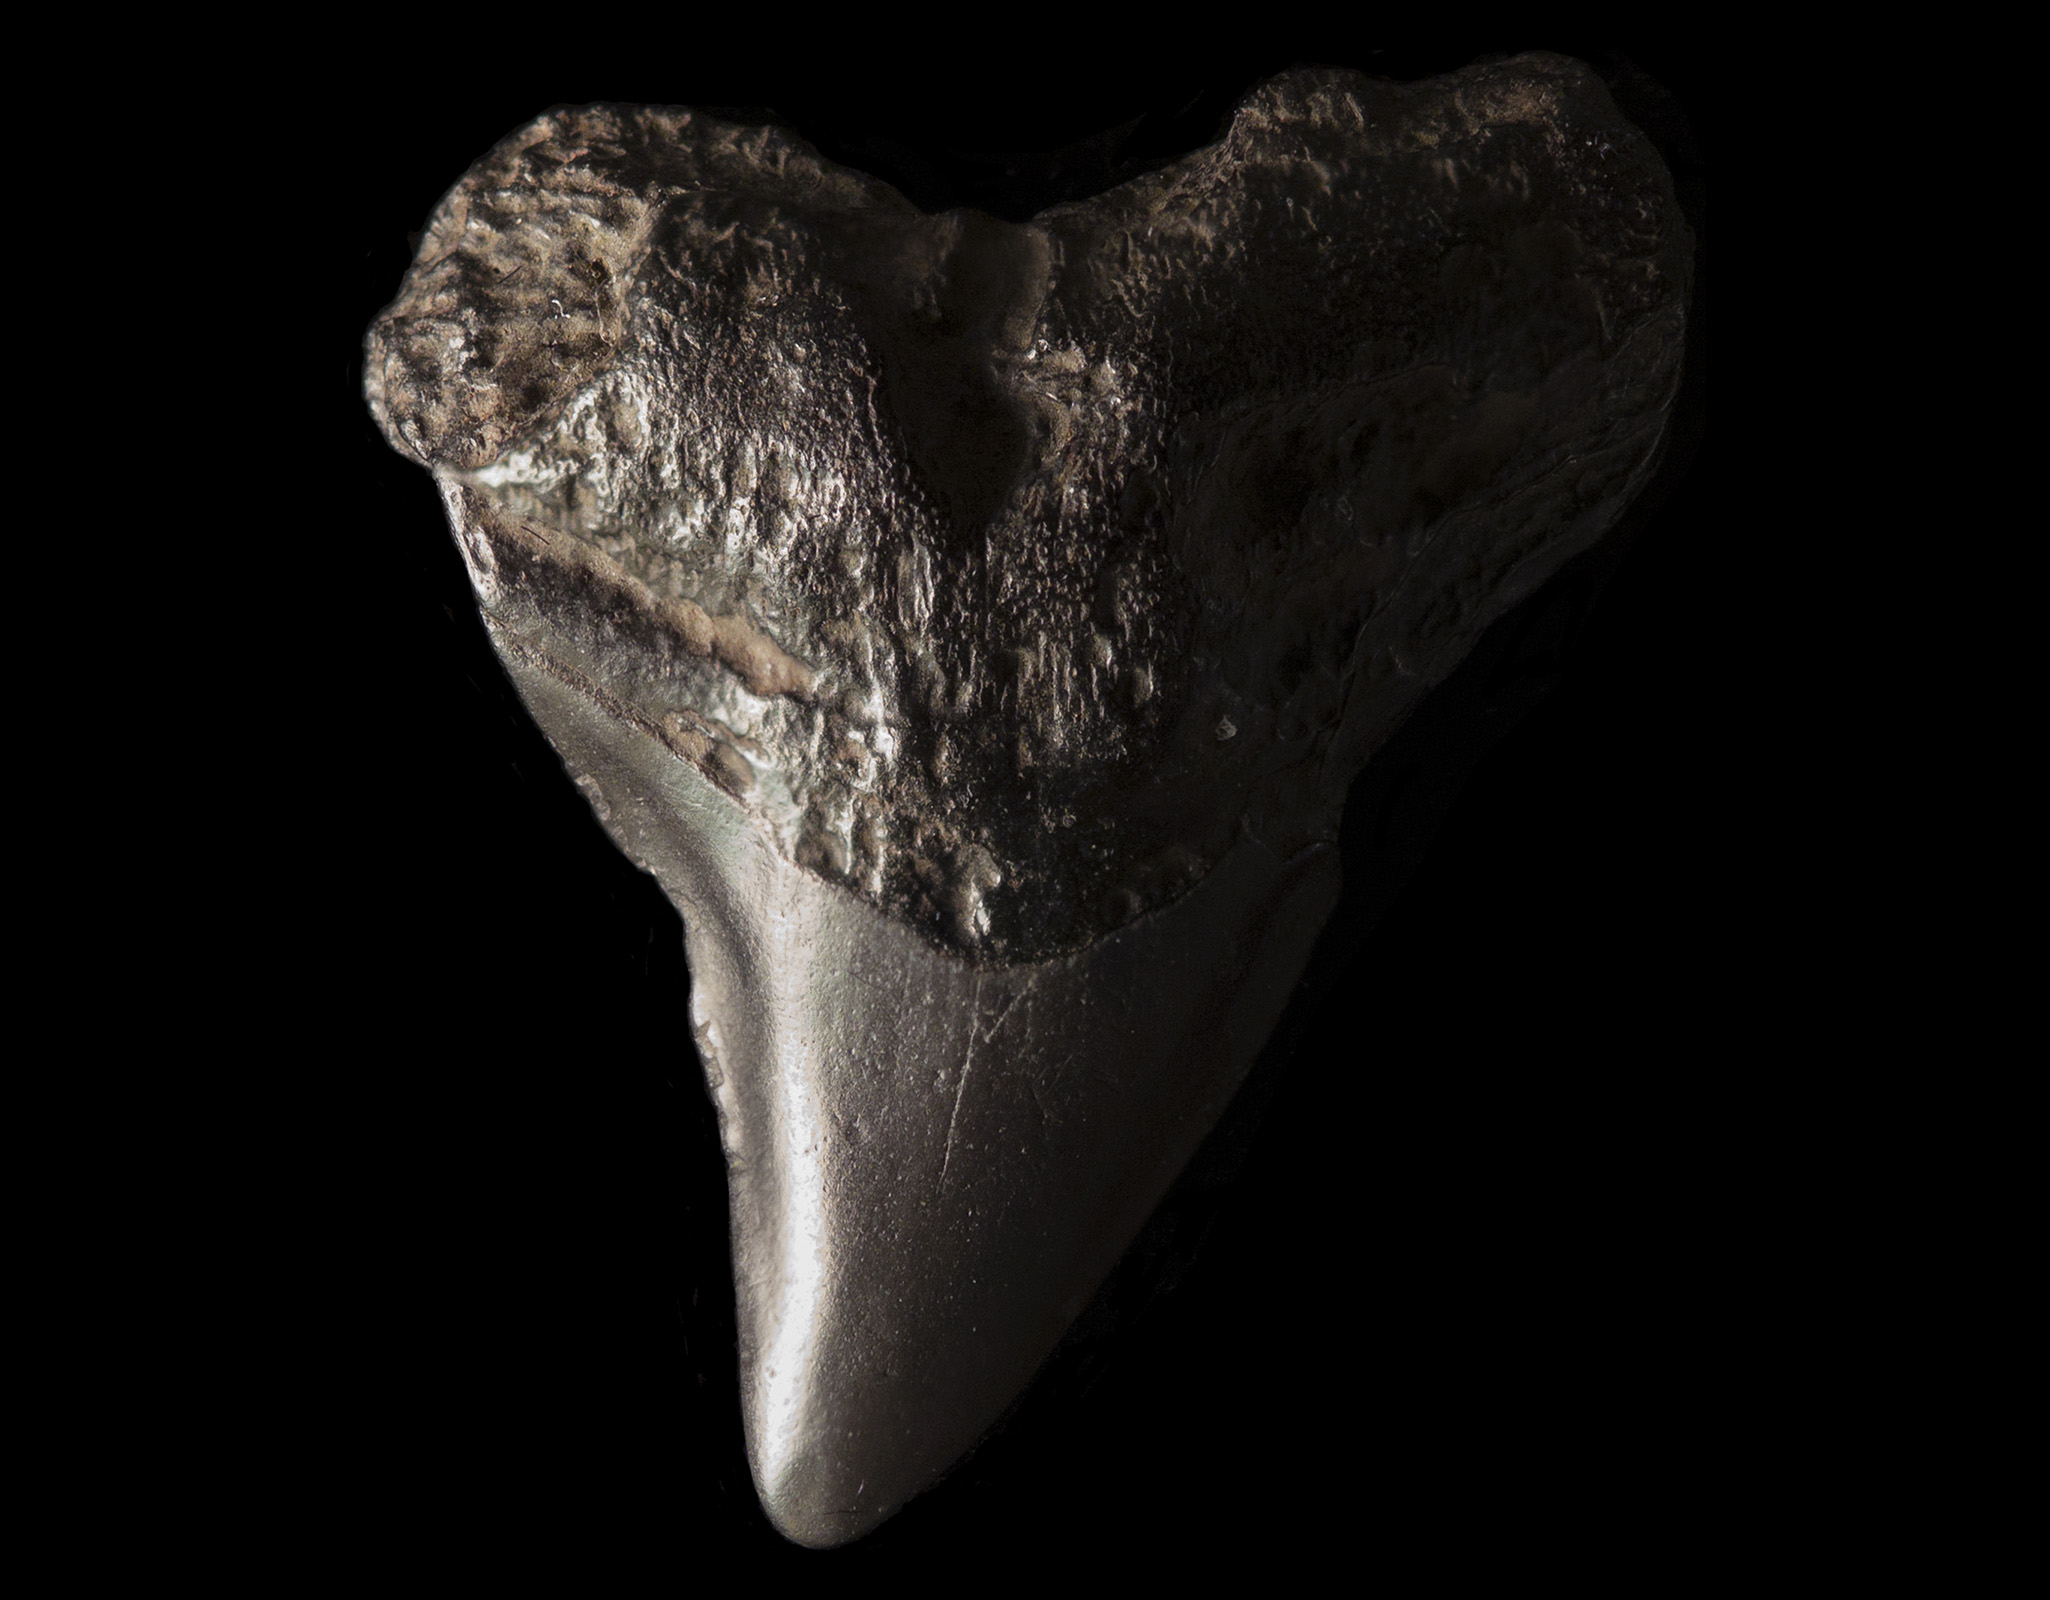 Lingual view of a fossilized prehistoric tooth of the lower jaw of a bull shark (Carcharhinus leucas).